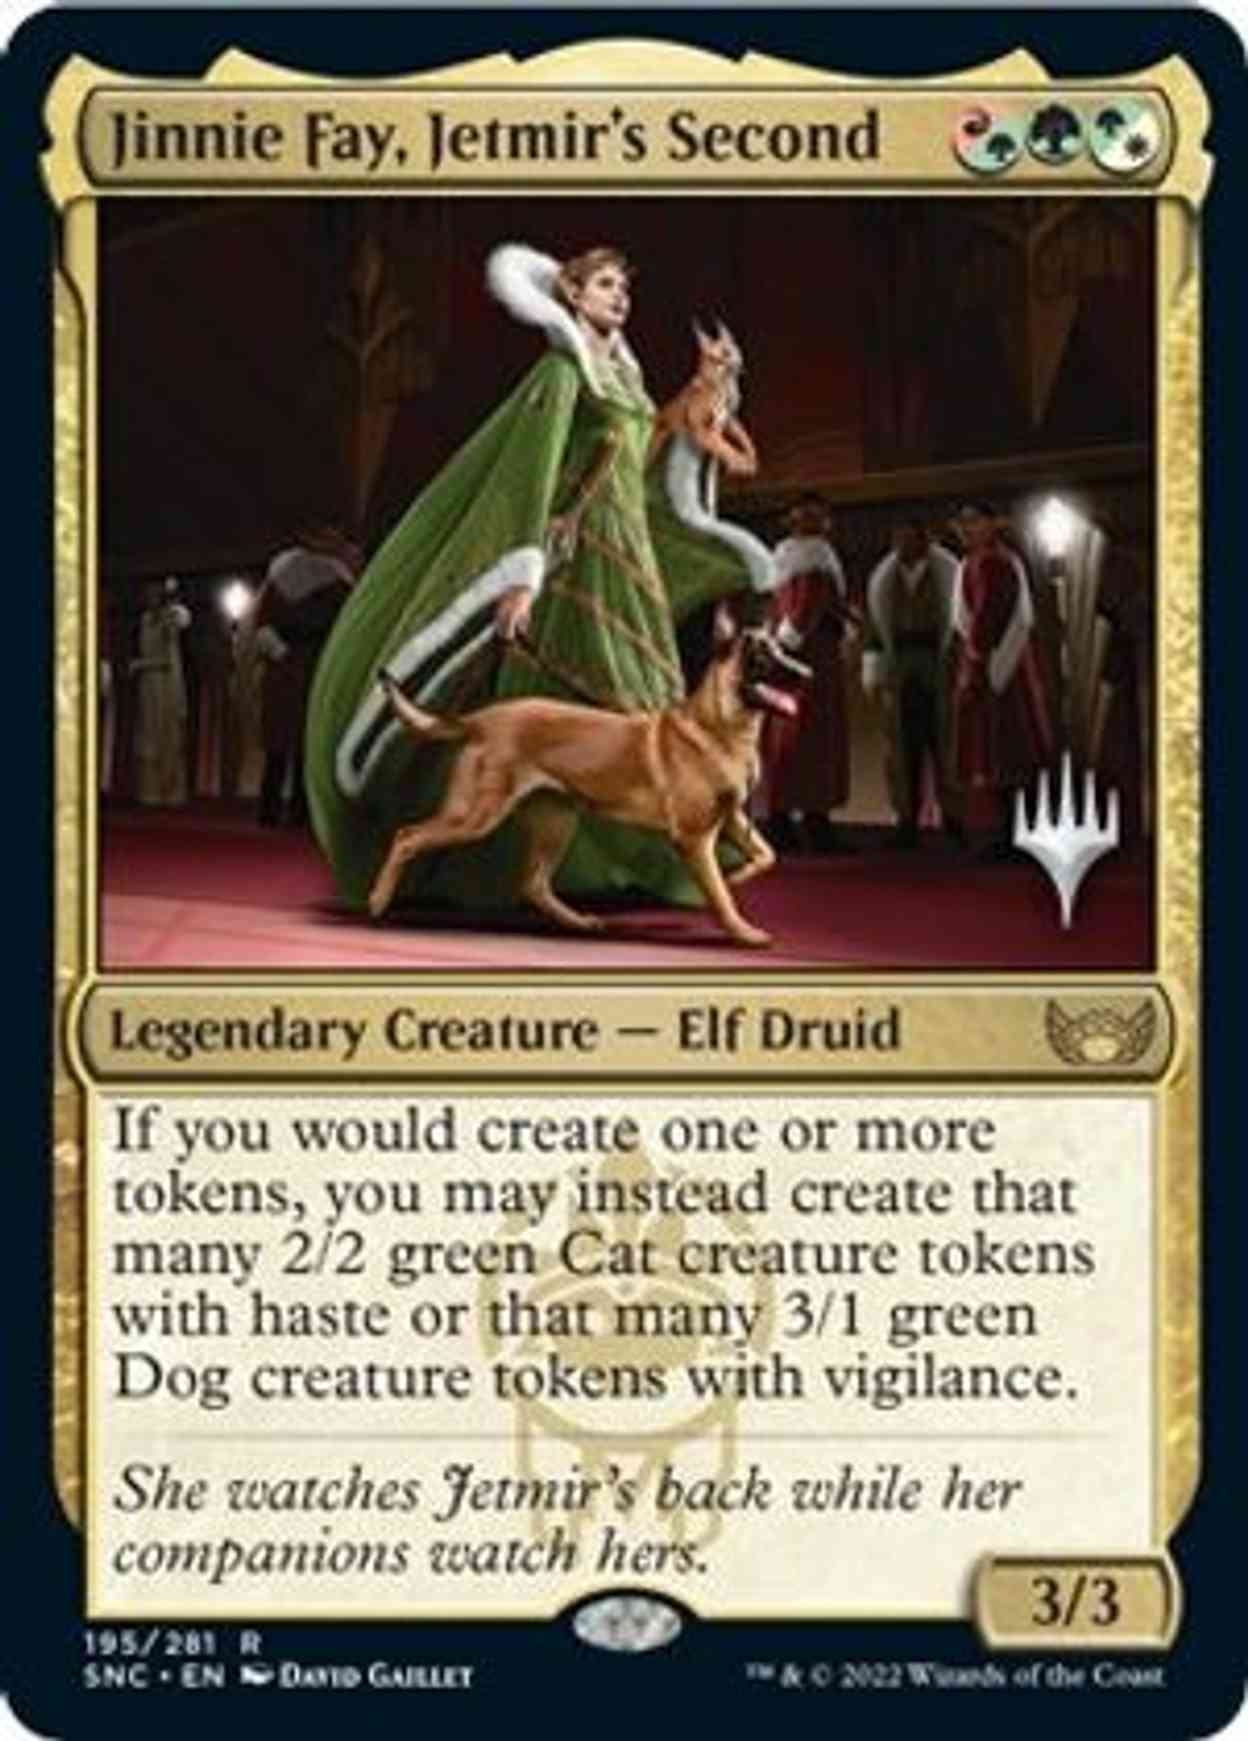 Jinnie Fay, Jetmir's Second magic card front